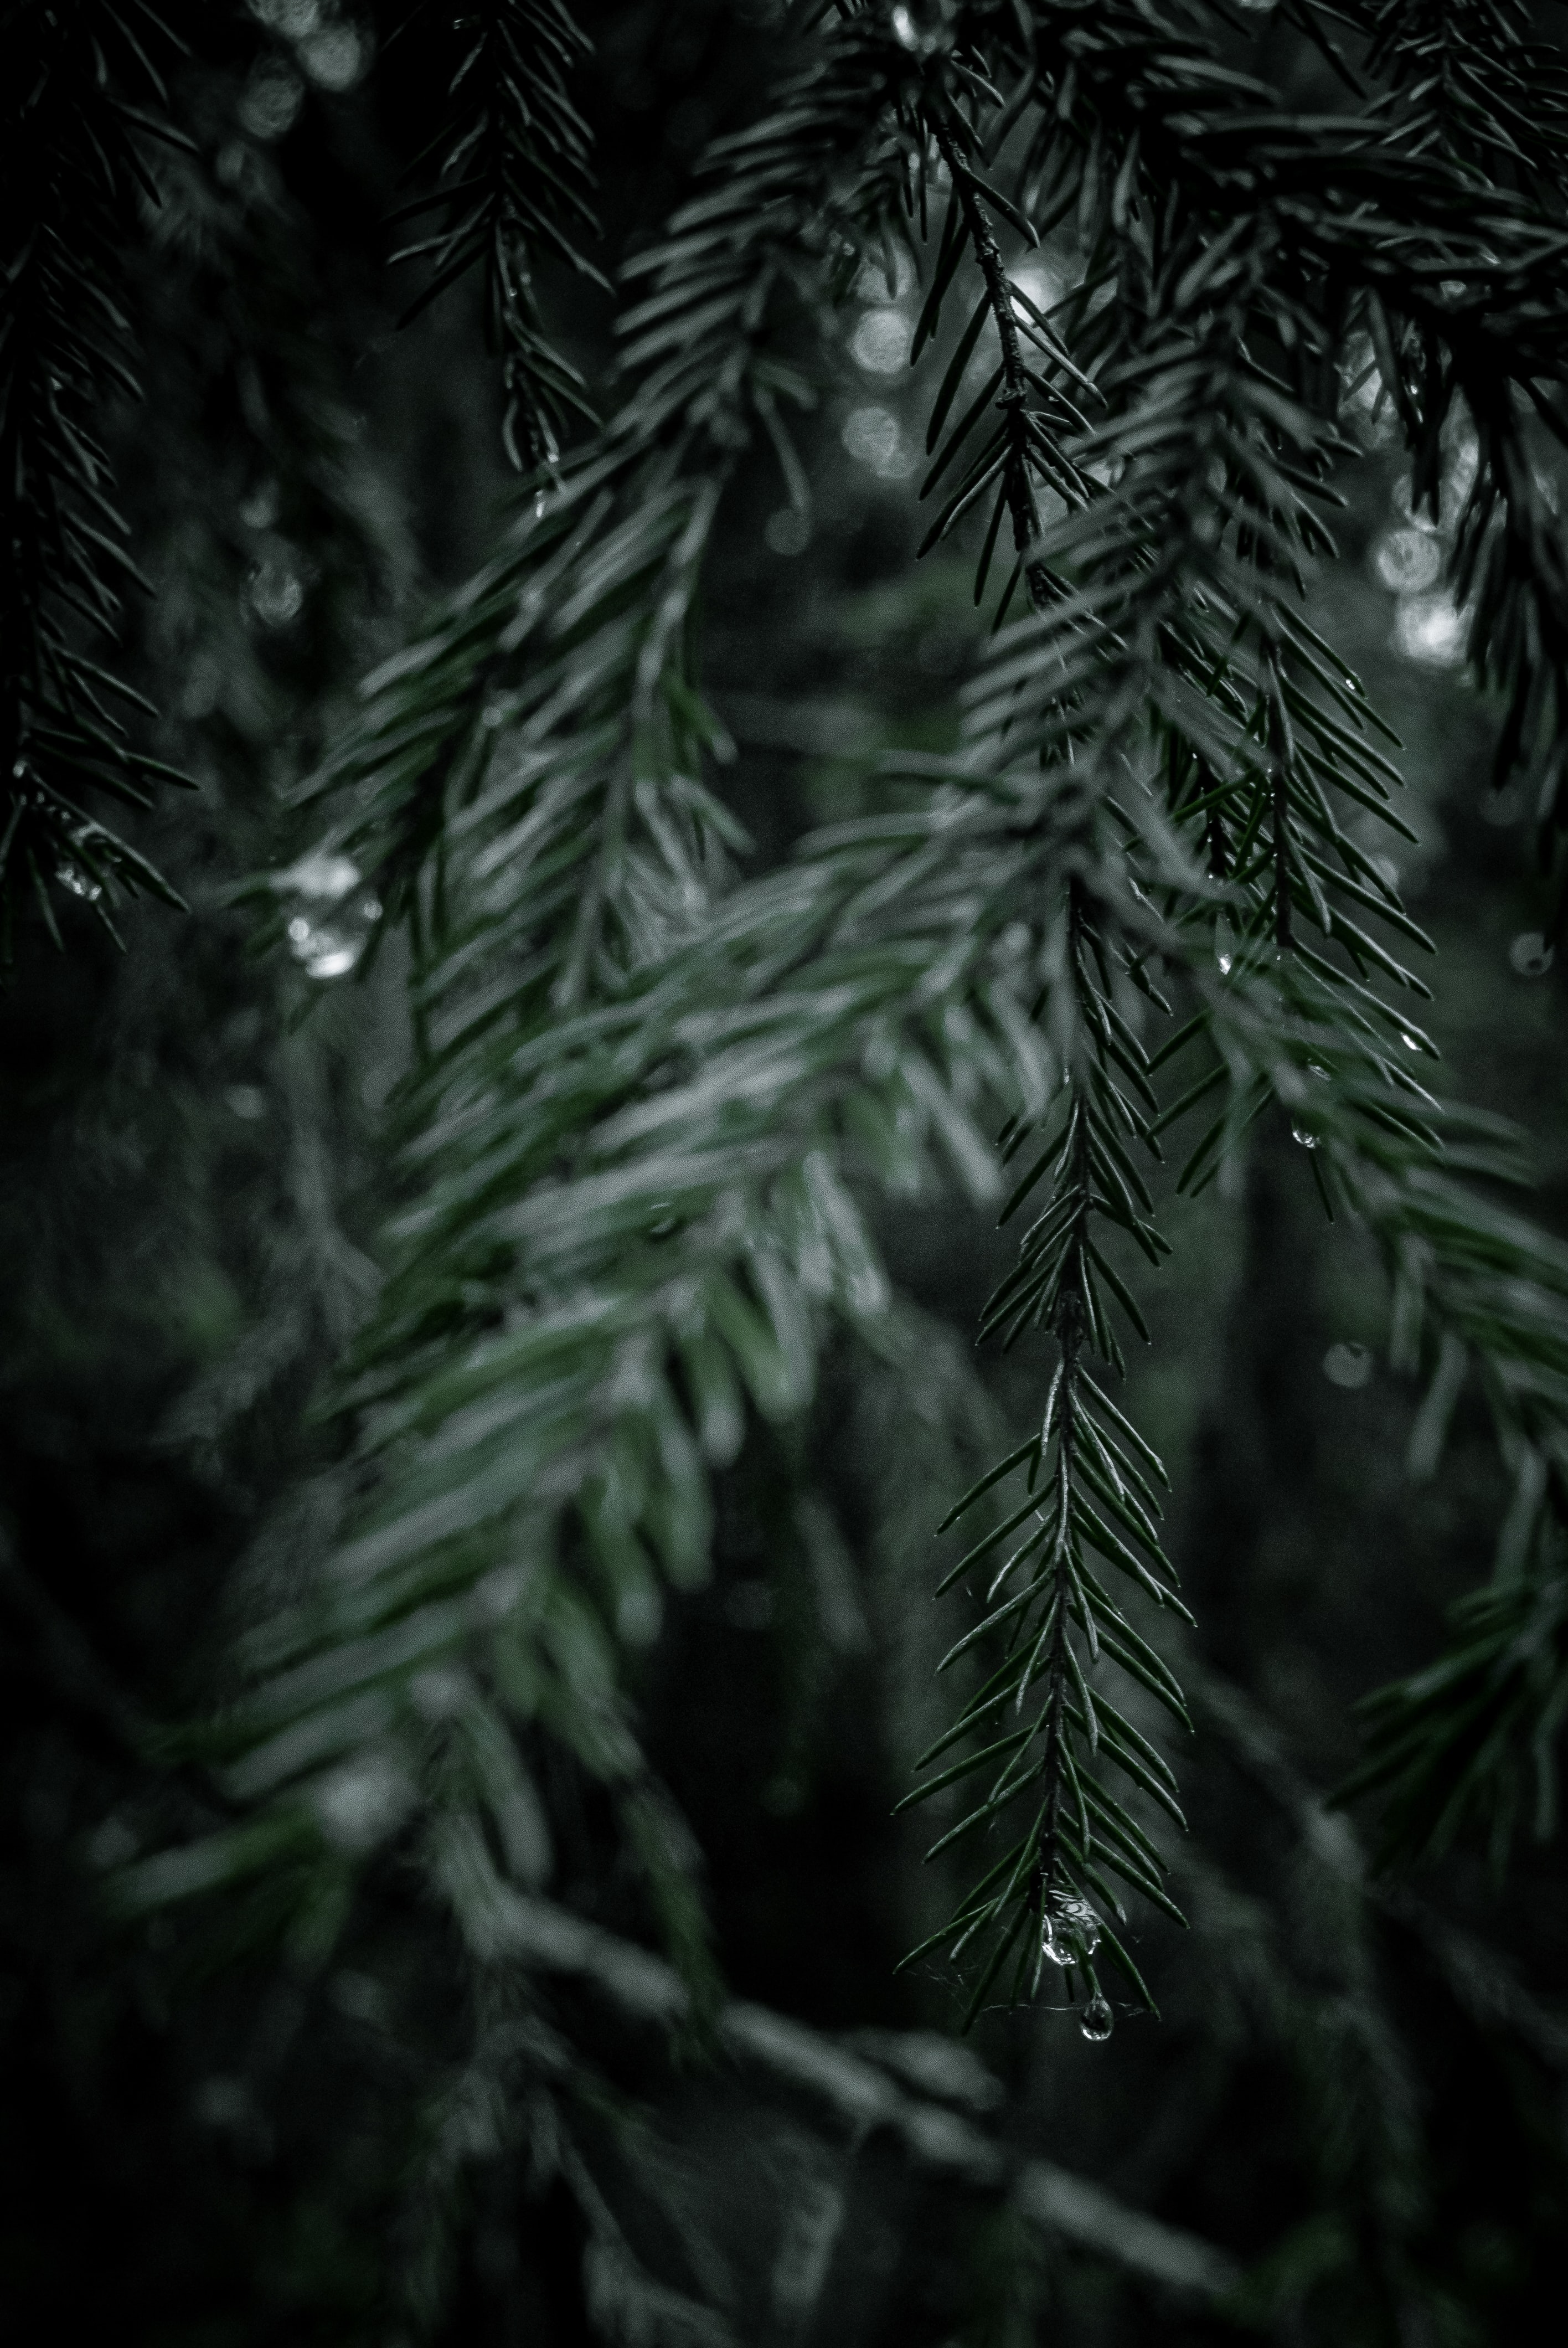 Free HD nature, needle, drops, wood, tree, branch, spruce, fir